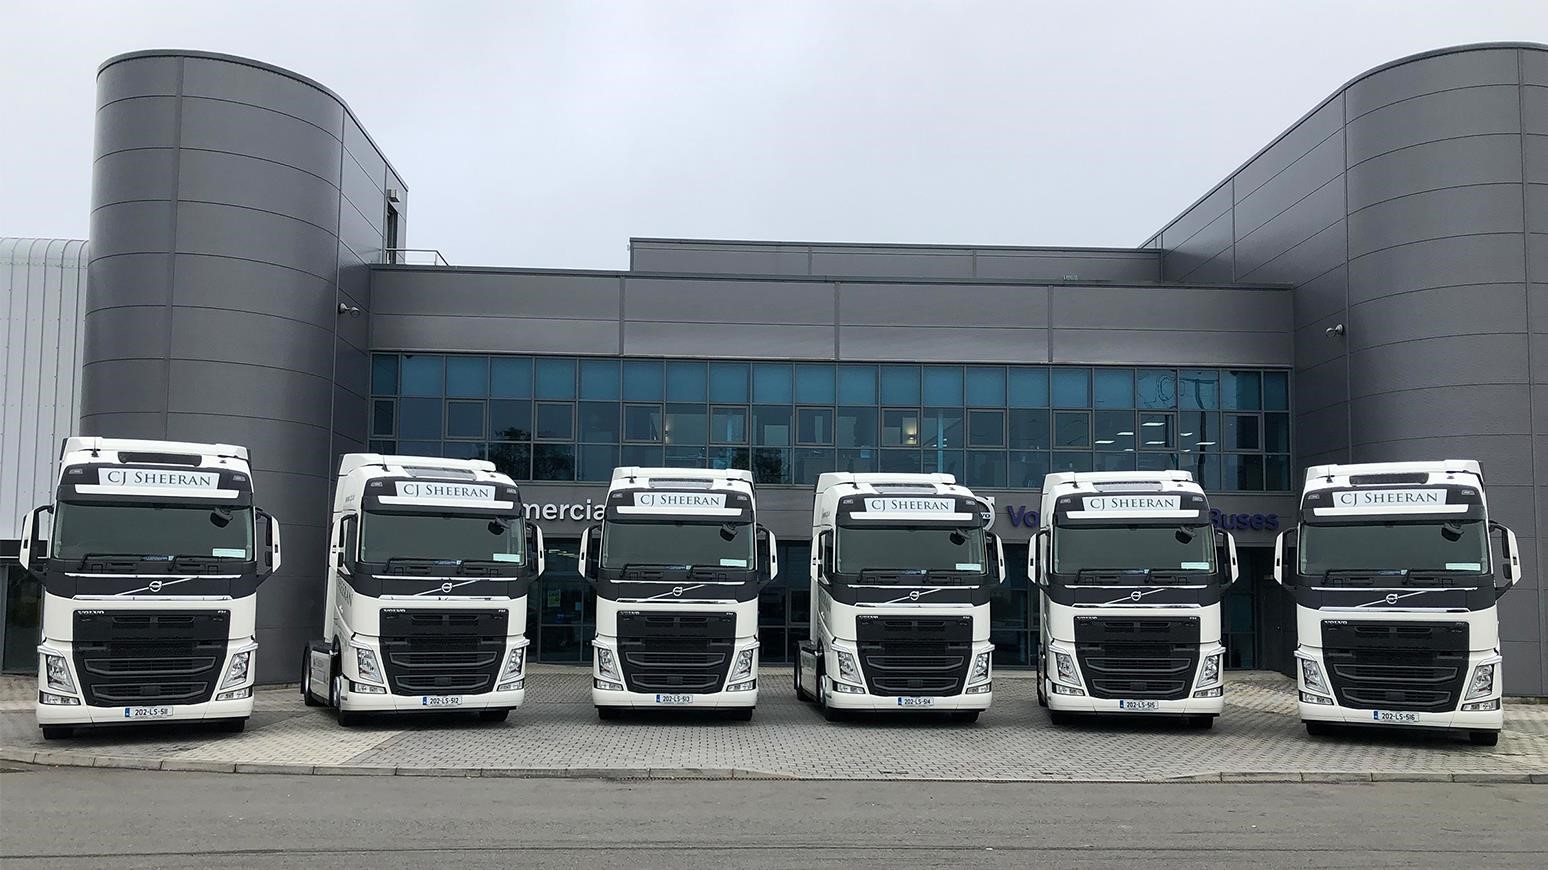 Irish Timber Specialist Adds First New Vehicles To Its Fleet: Six Volvo FH 460 4x2 Tractor Units